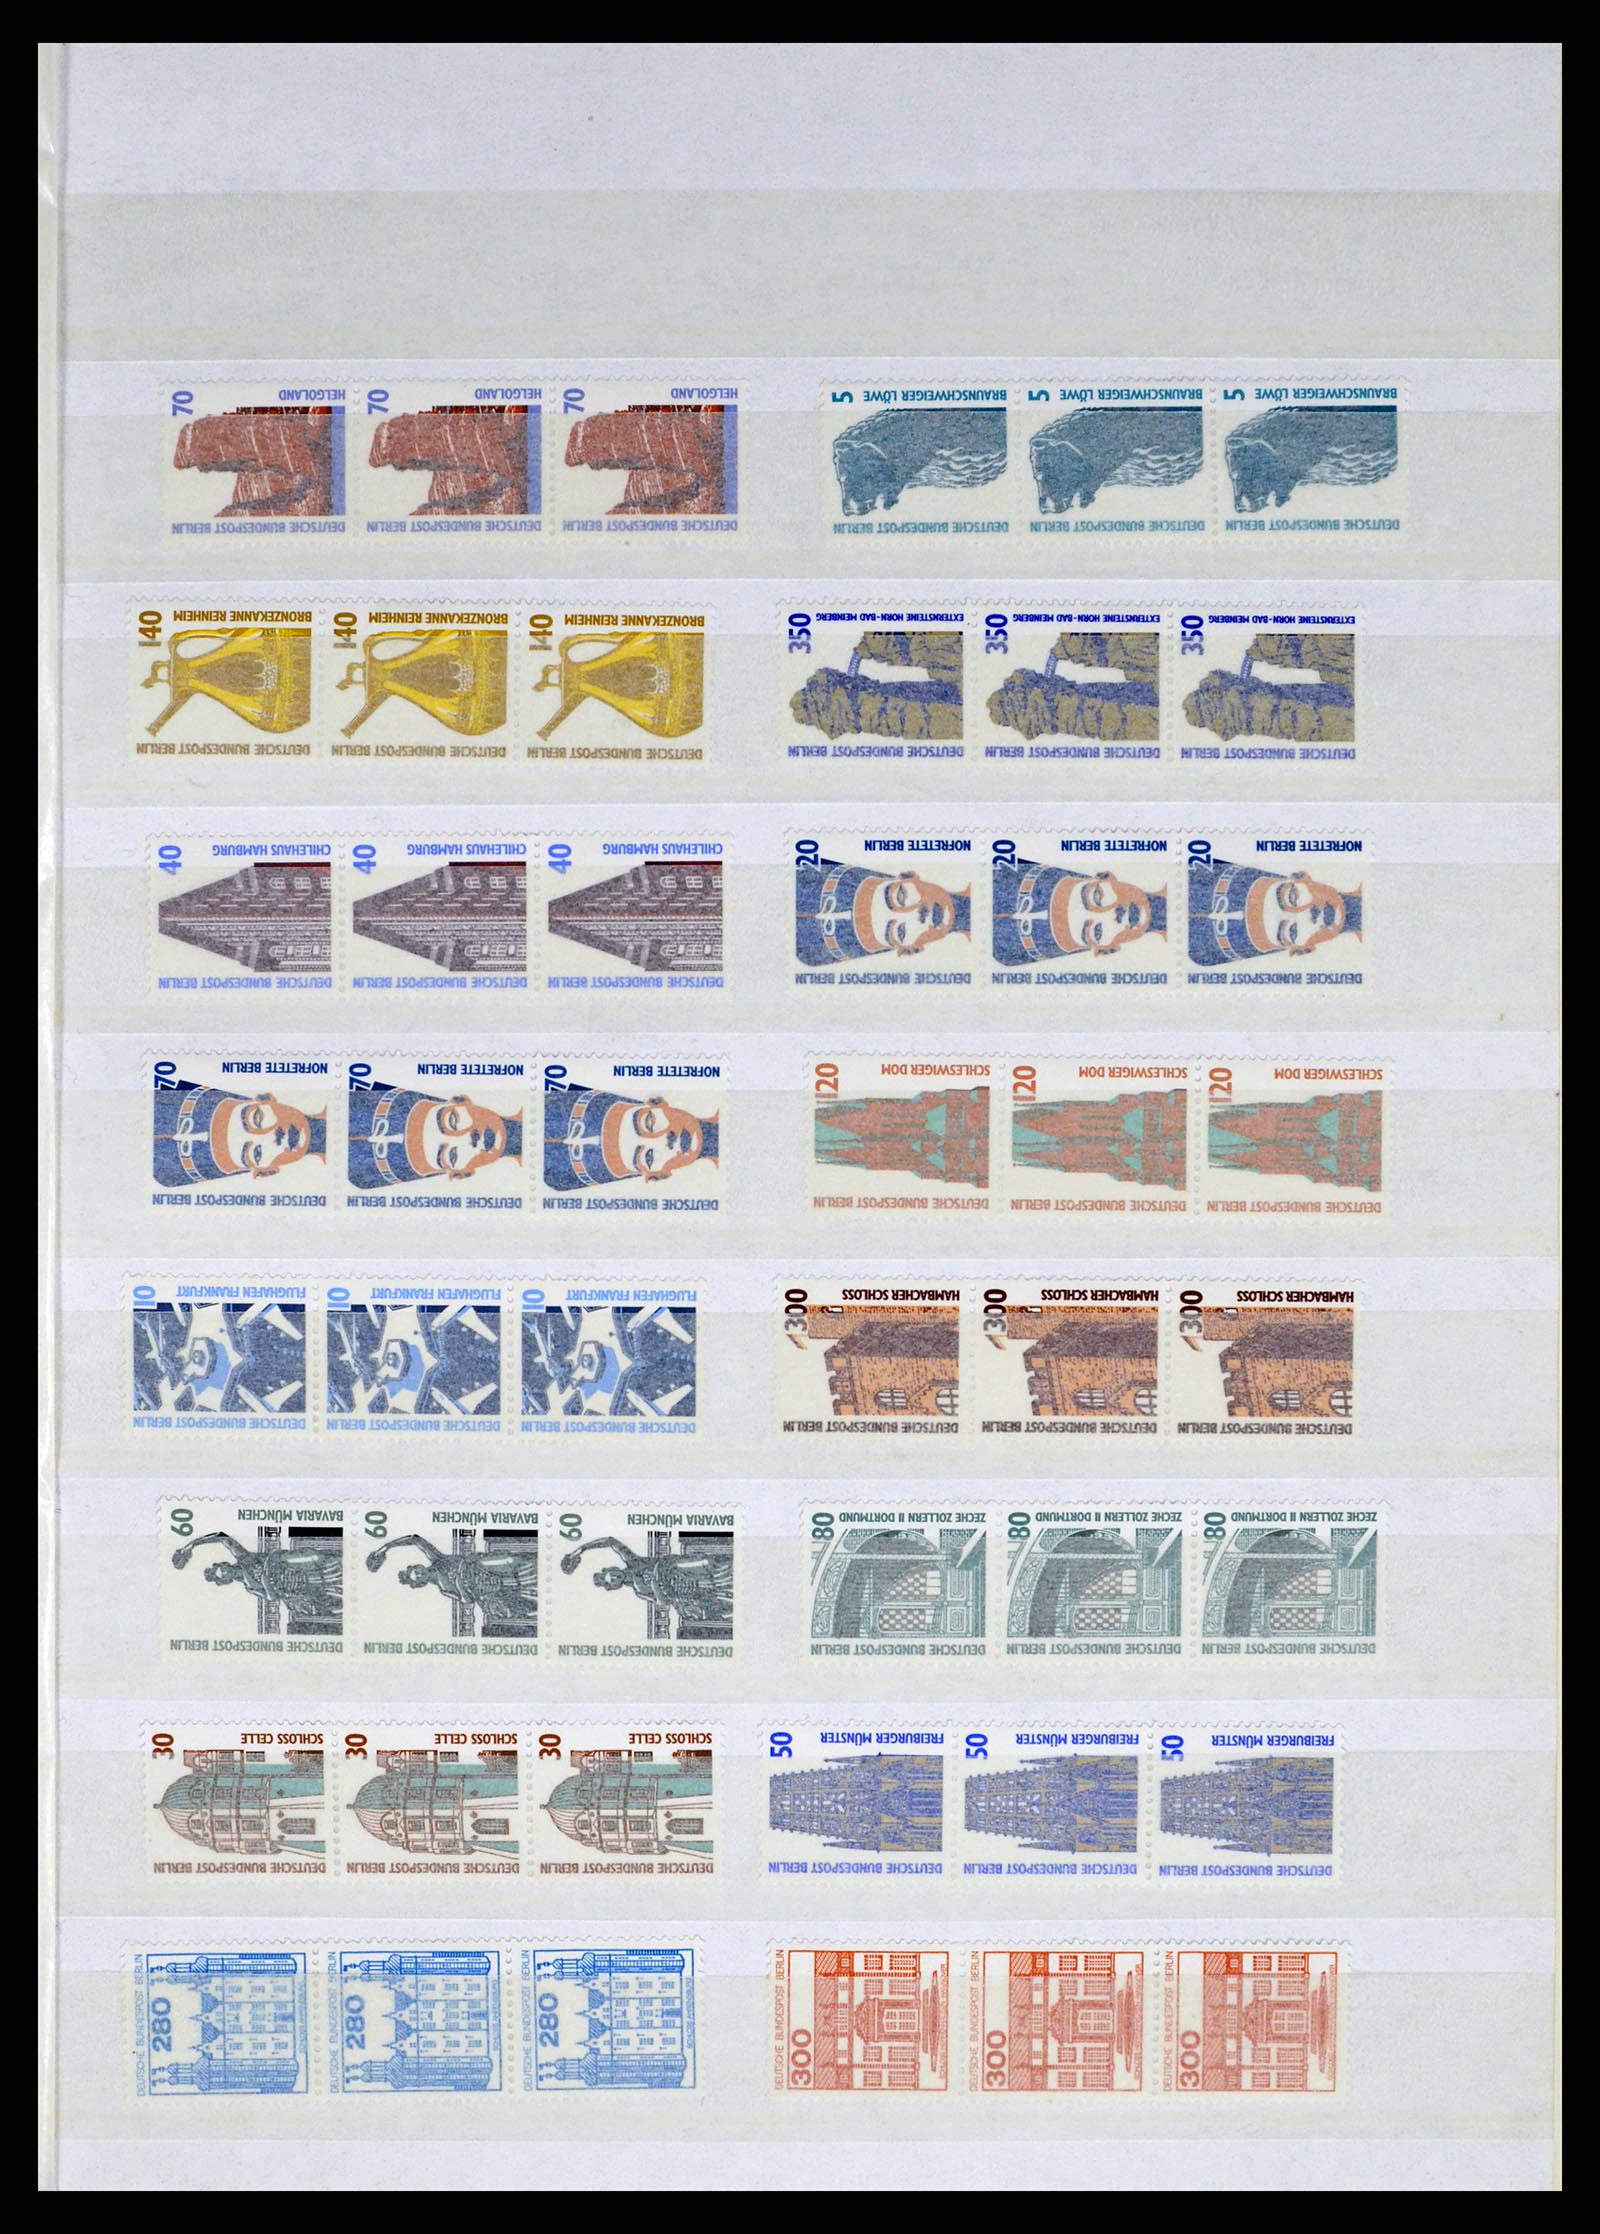 37354 084 - Stamp collection 37354 Bundespost and Berlin 1955-2000.